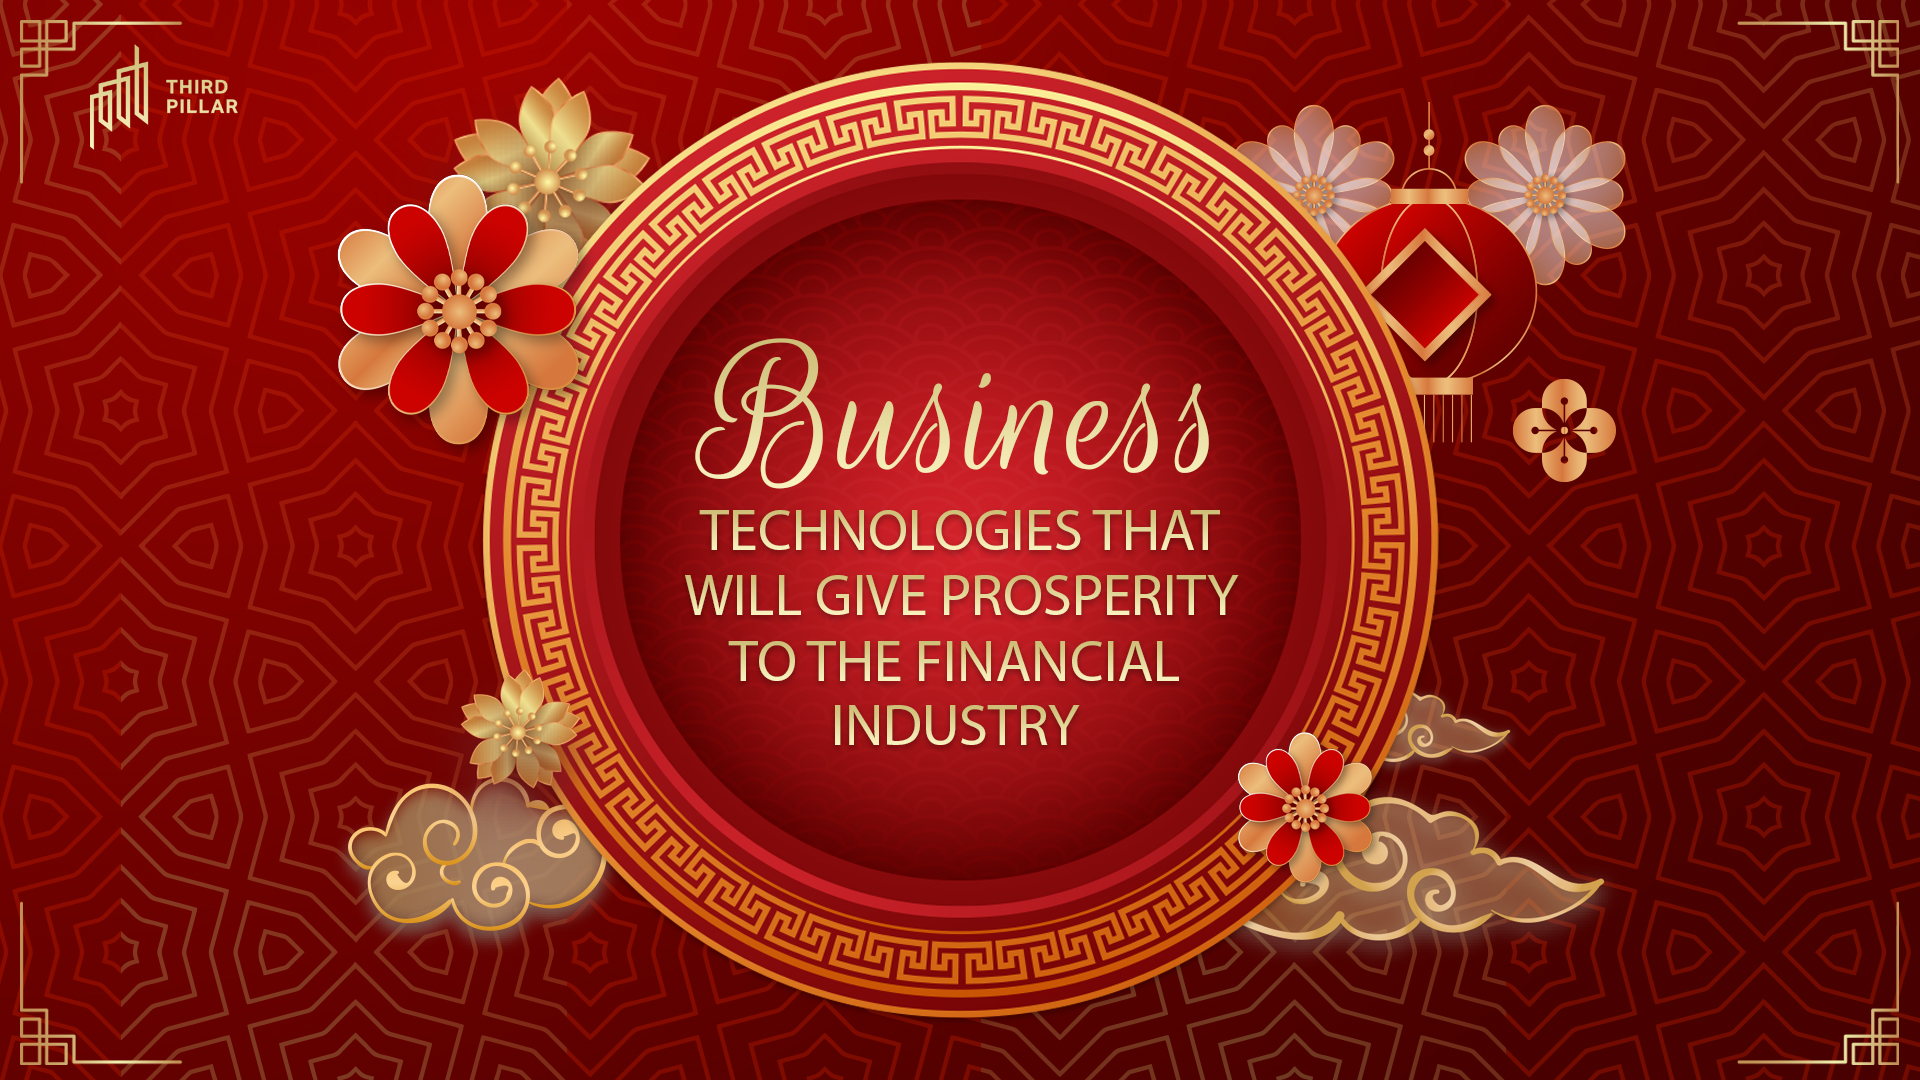 Business technologies that drive prosperity for financial industries